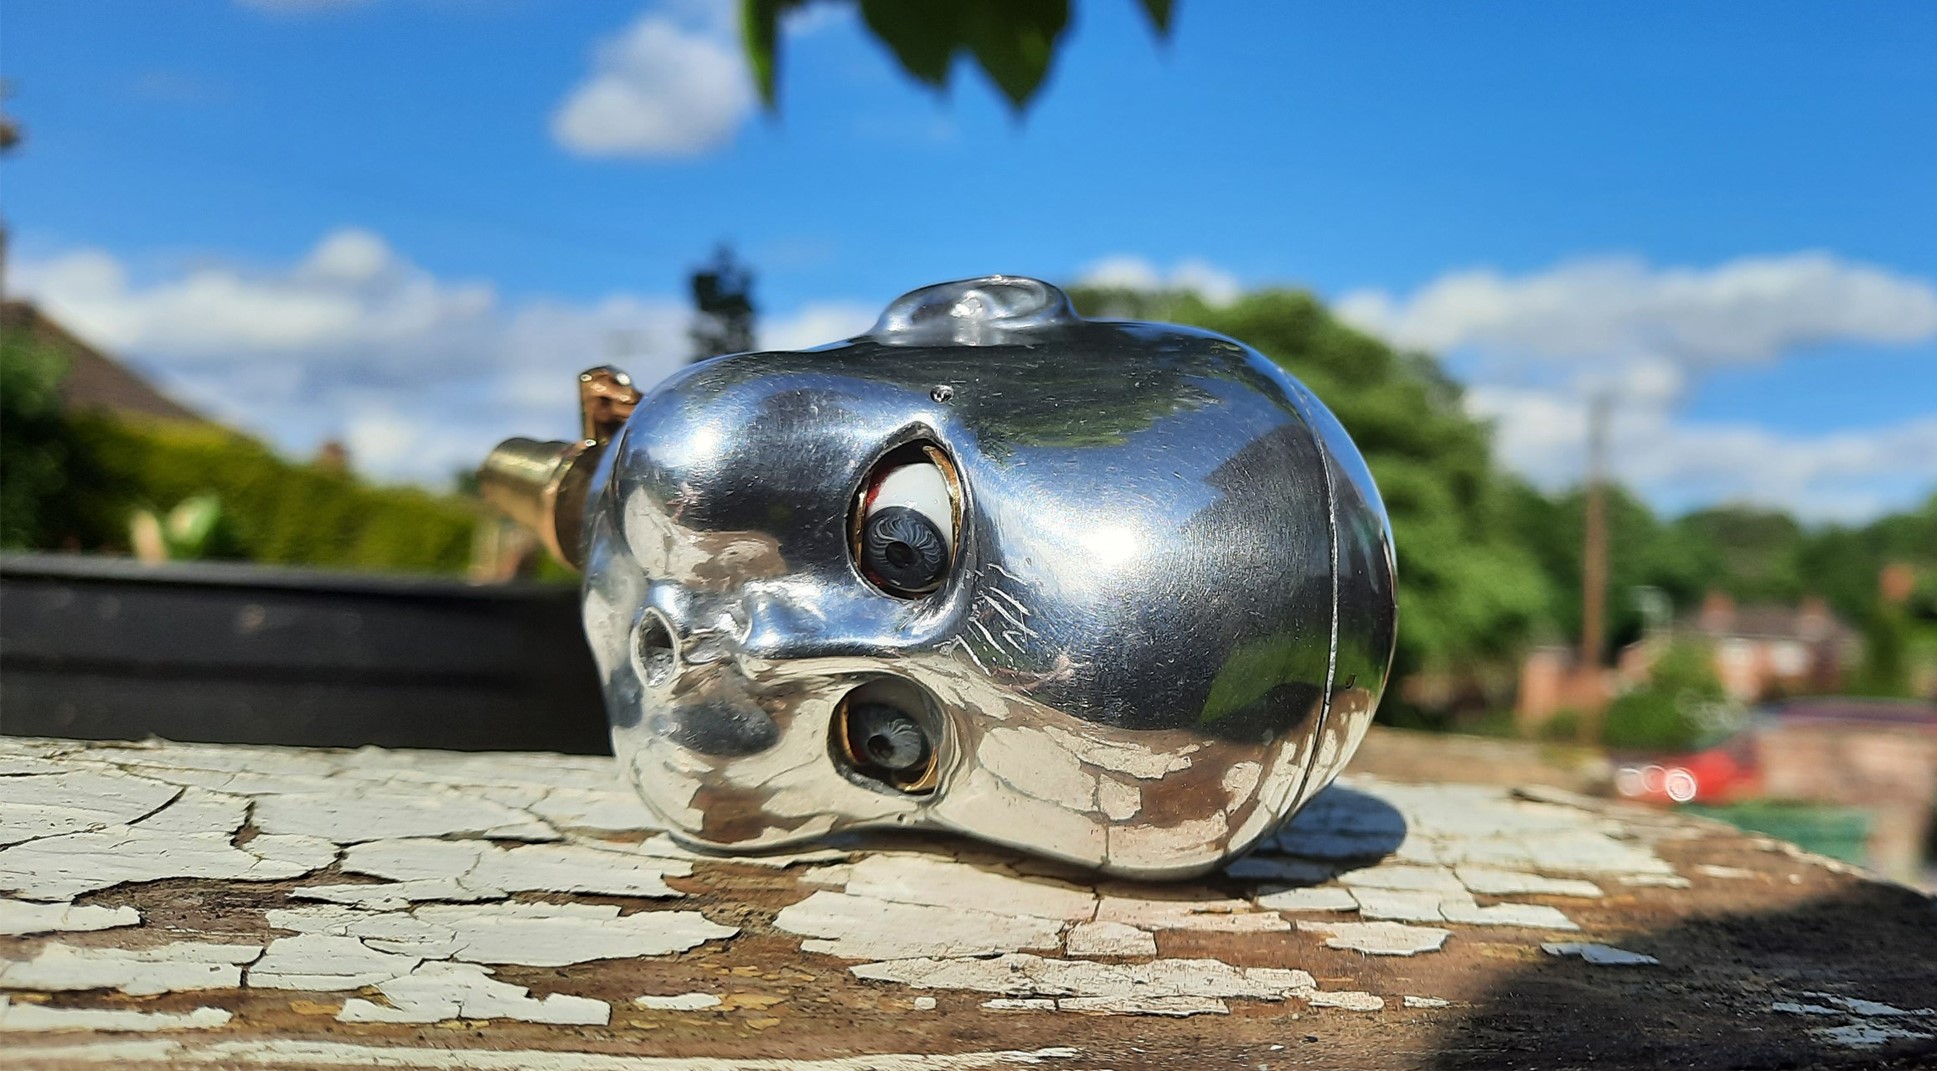 A metal Kinetic sculpture by Marek Jeczalik. A polished aluminium dolls head with glass eyes rests on its side in the sun (part of an automaton).